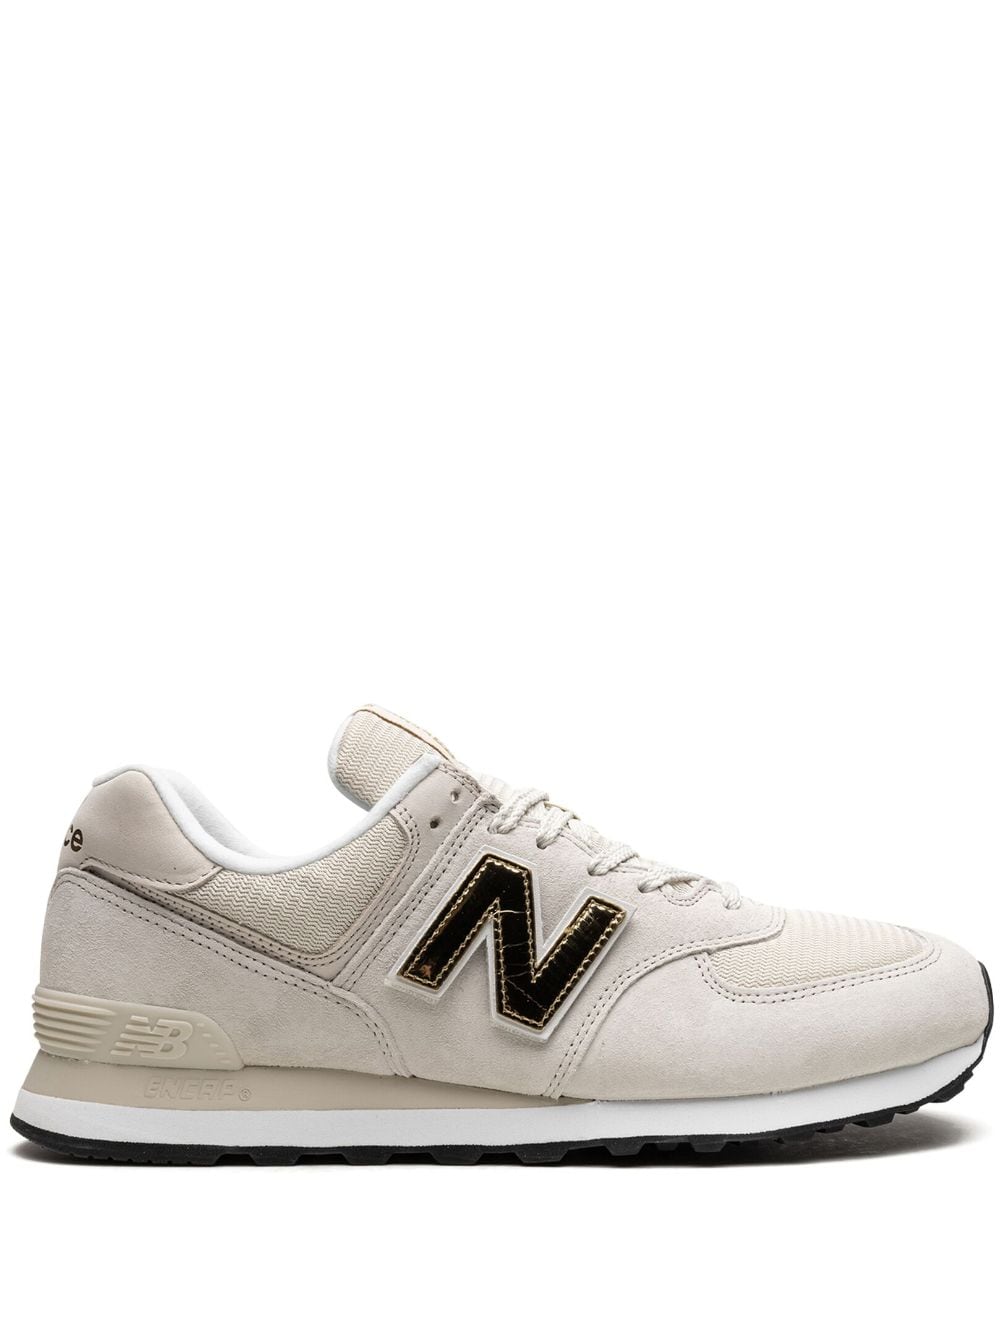 New Balance 574 "Removable Patch" sneakers - Neutrals